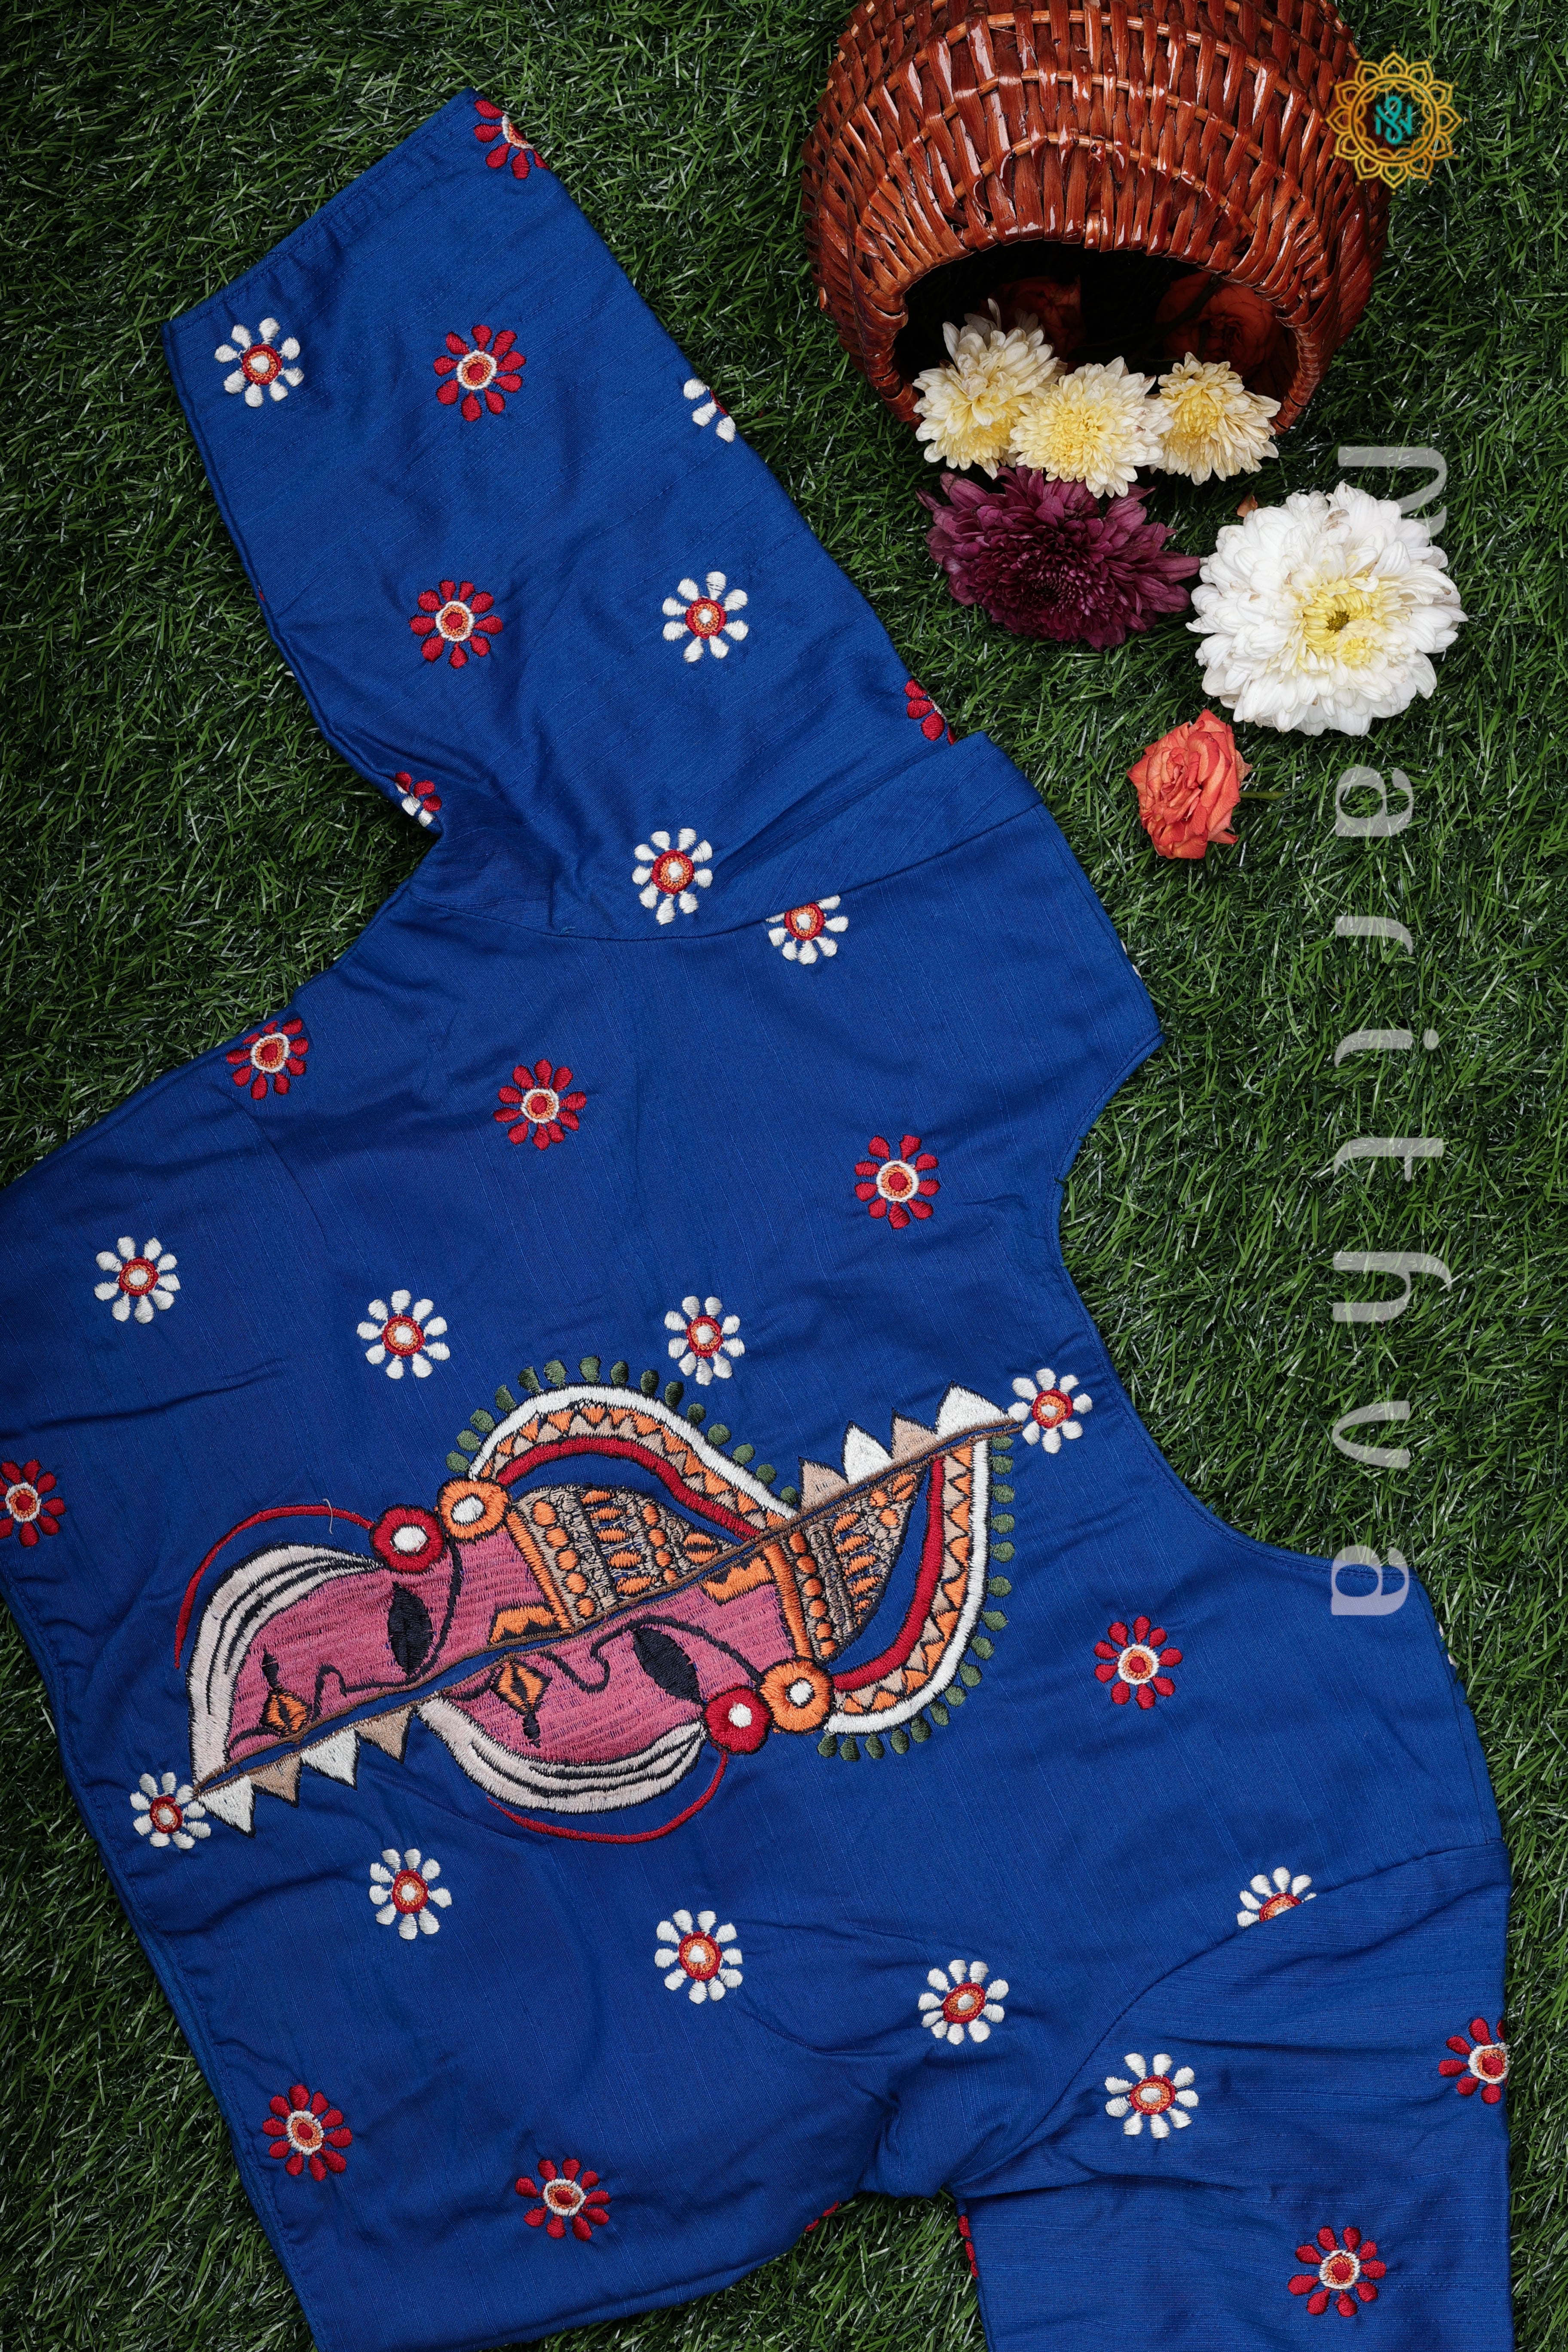 BLUE - READYMADE COTTON BLOUSE WITH HAND EMBROIDERY DESIGN